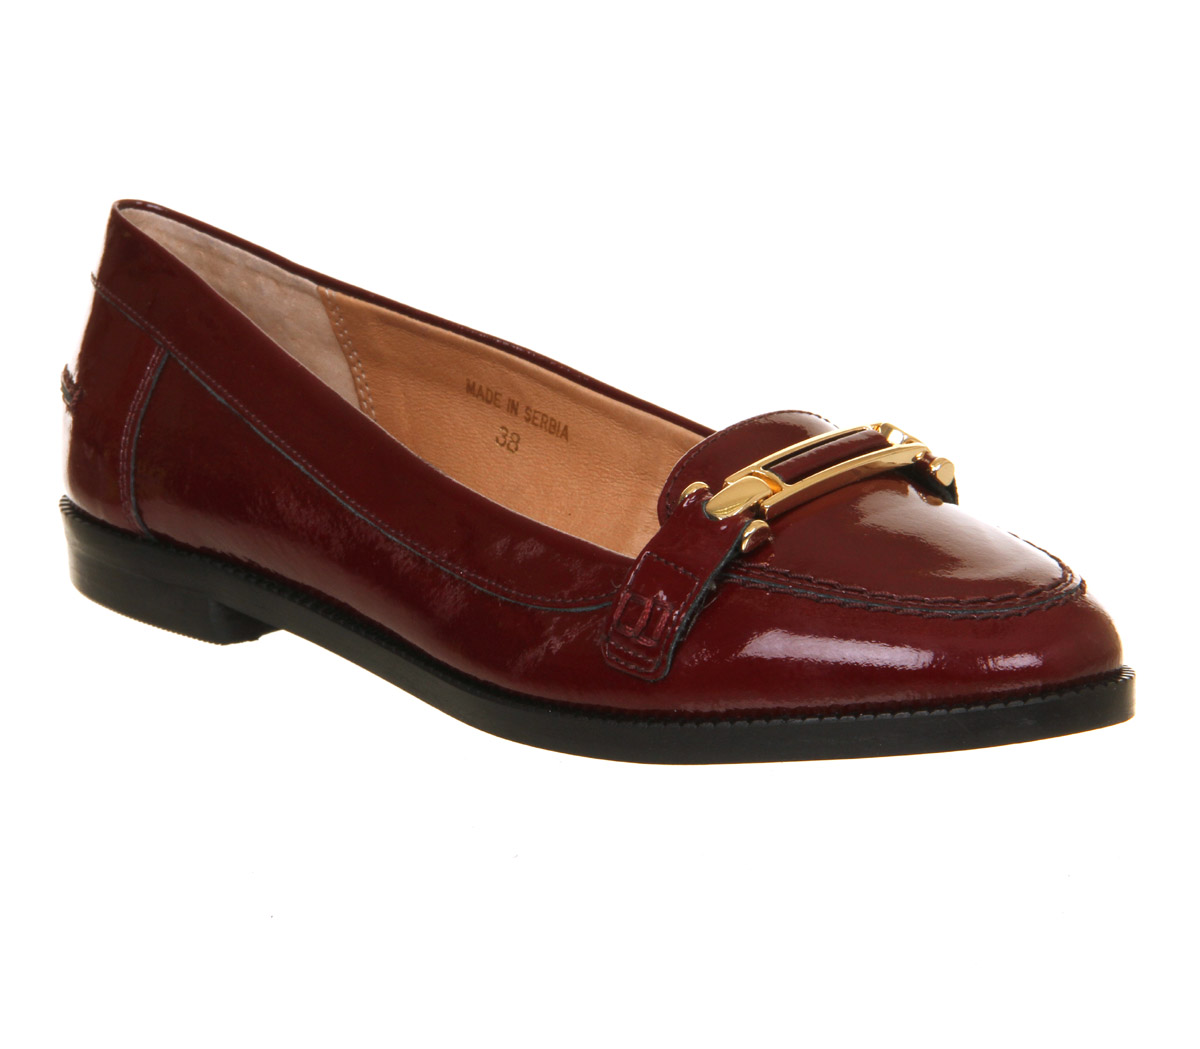 Office Victoria loafers Burgundy Patent Leather - Flat Shoes for Women